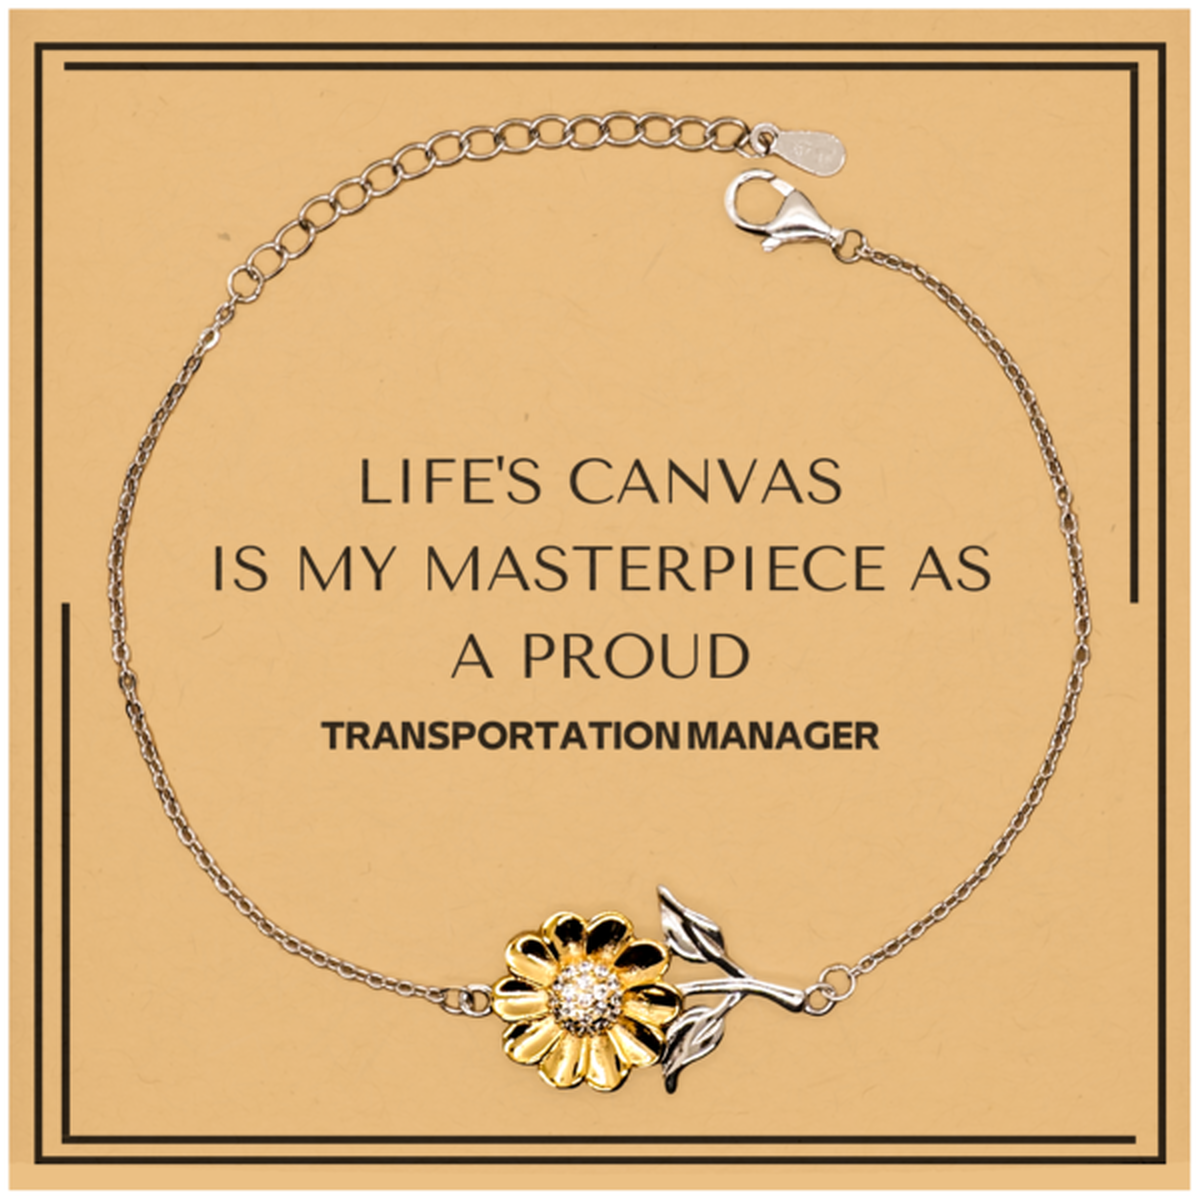 Proud Transportation Manager Gifts, Life's canvas is my masterpiece, Epic Birthday Christmas Unique Sunflower Bracelet For Transportation Manager, Coworkers, Men, Women, Friends